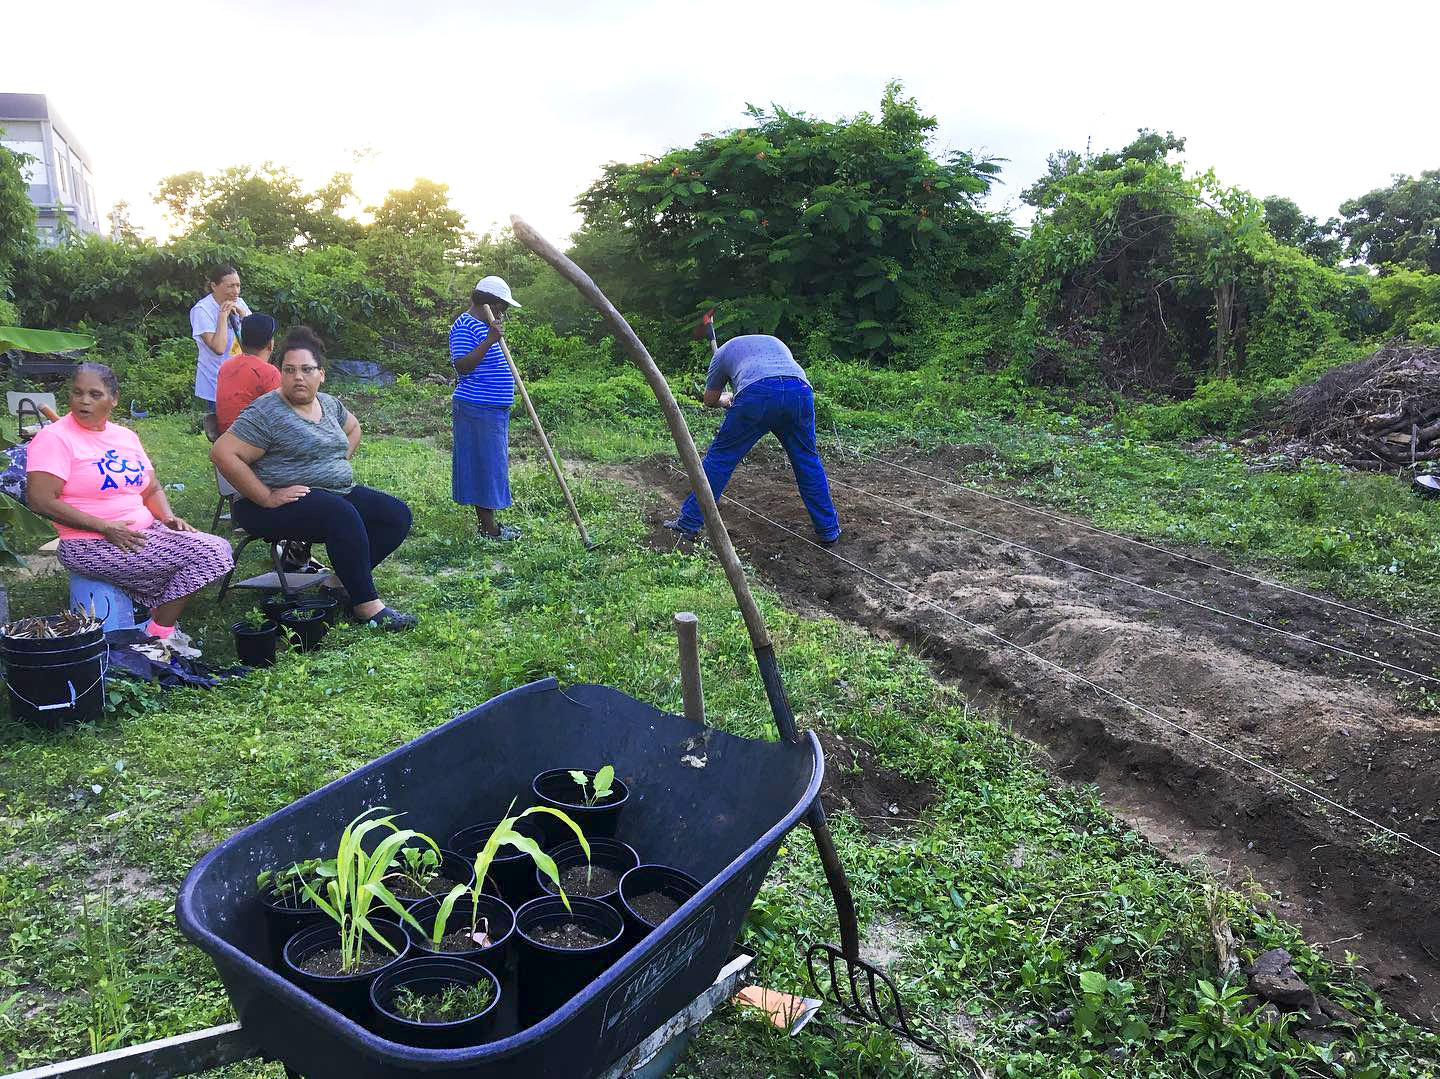 agriculture practices in Vieques, two people are near a soil bed, others are seen in the background. A wheel barrow with potted plants in black plastic planters is in the foreground. A garden hoe leans on the wheel barrow.  